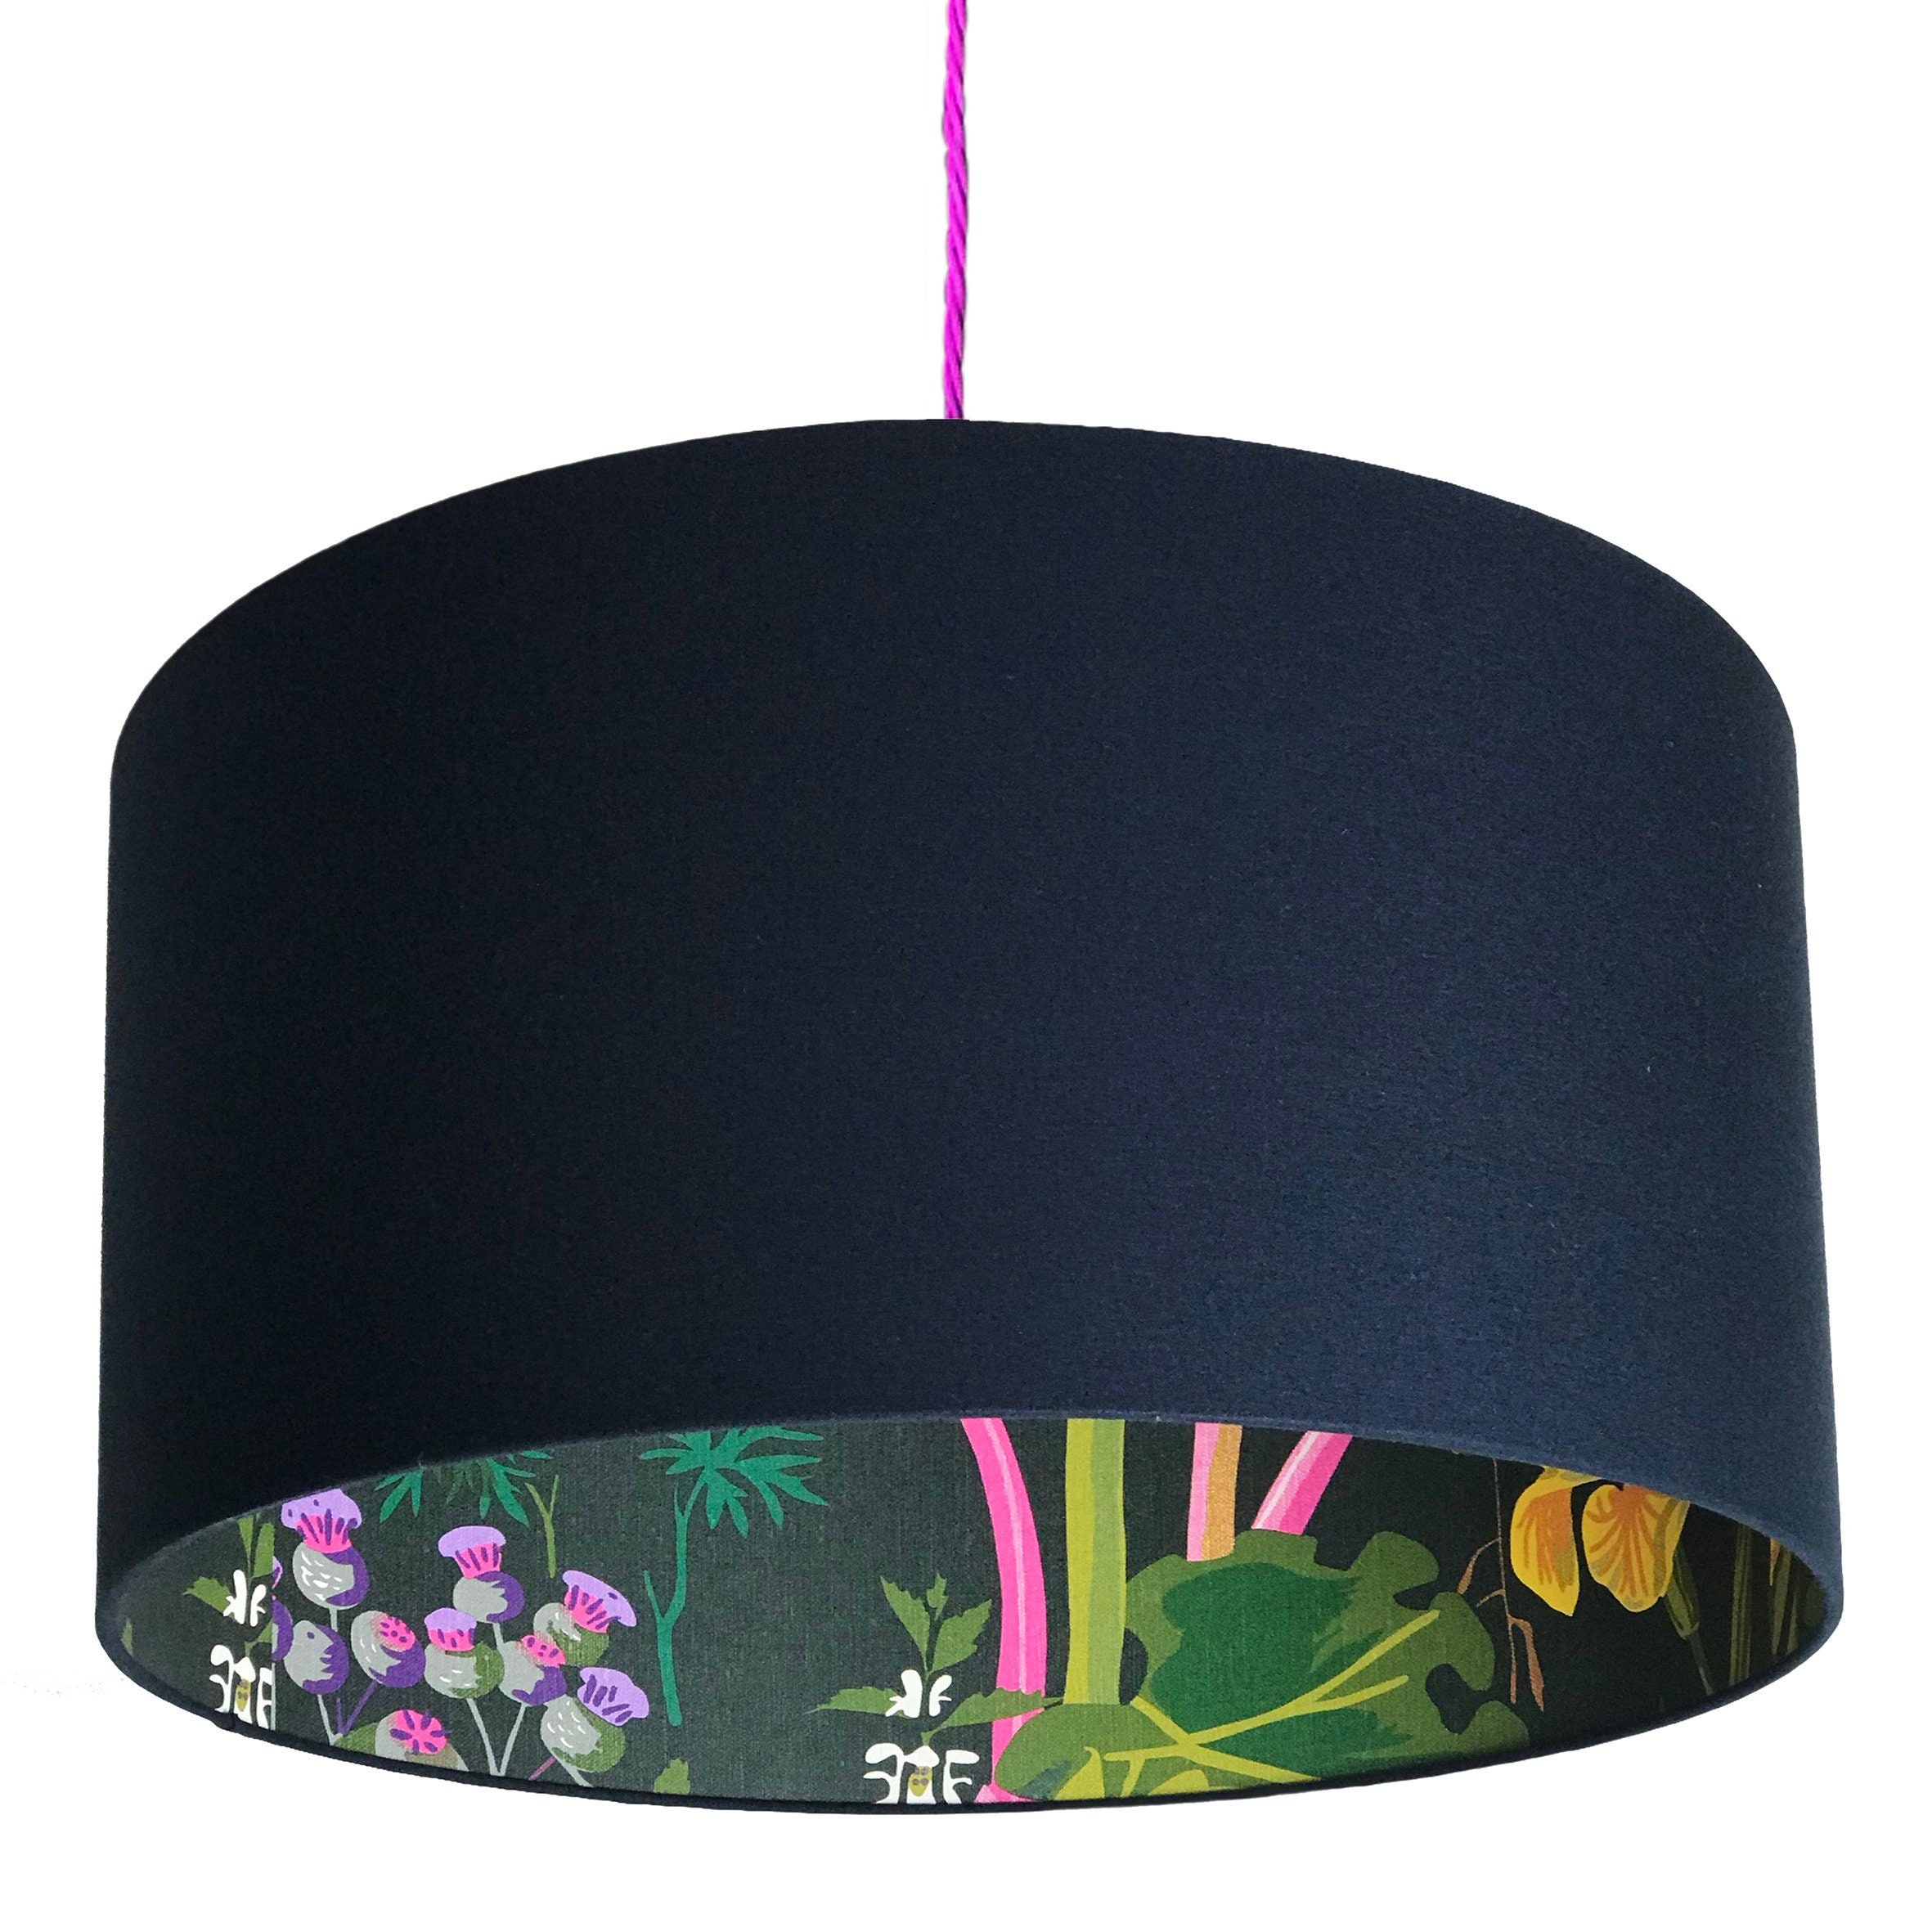 Rabarber Silhouette Lampshade In Deep, Silhouette Lampshade